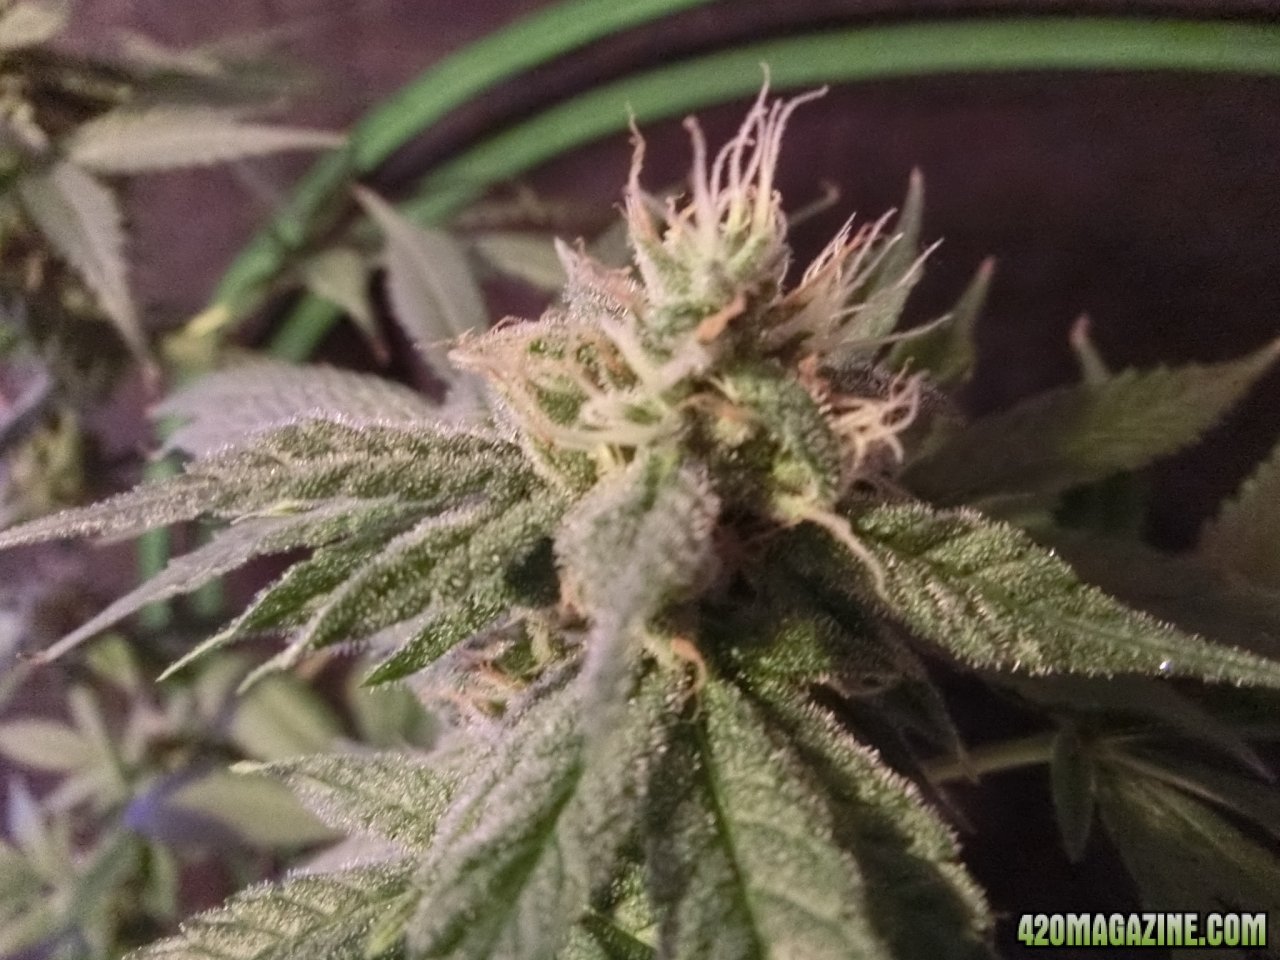 Day 84 Ayahuasca Purple #3 Flower Day 36 - Chunky trichomes on the buds